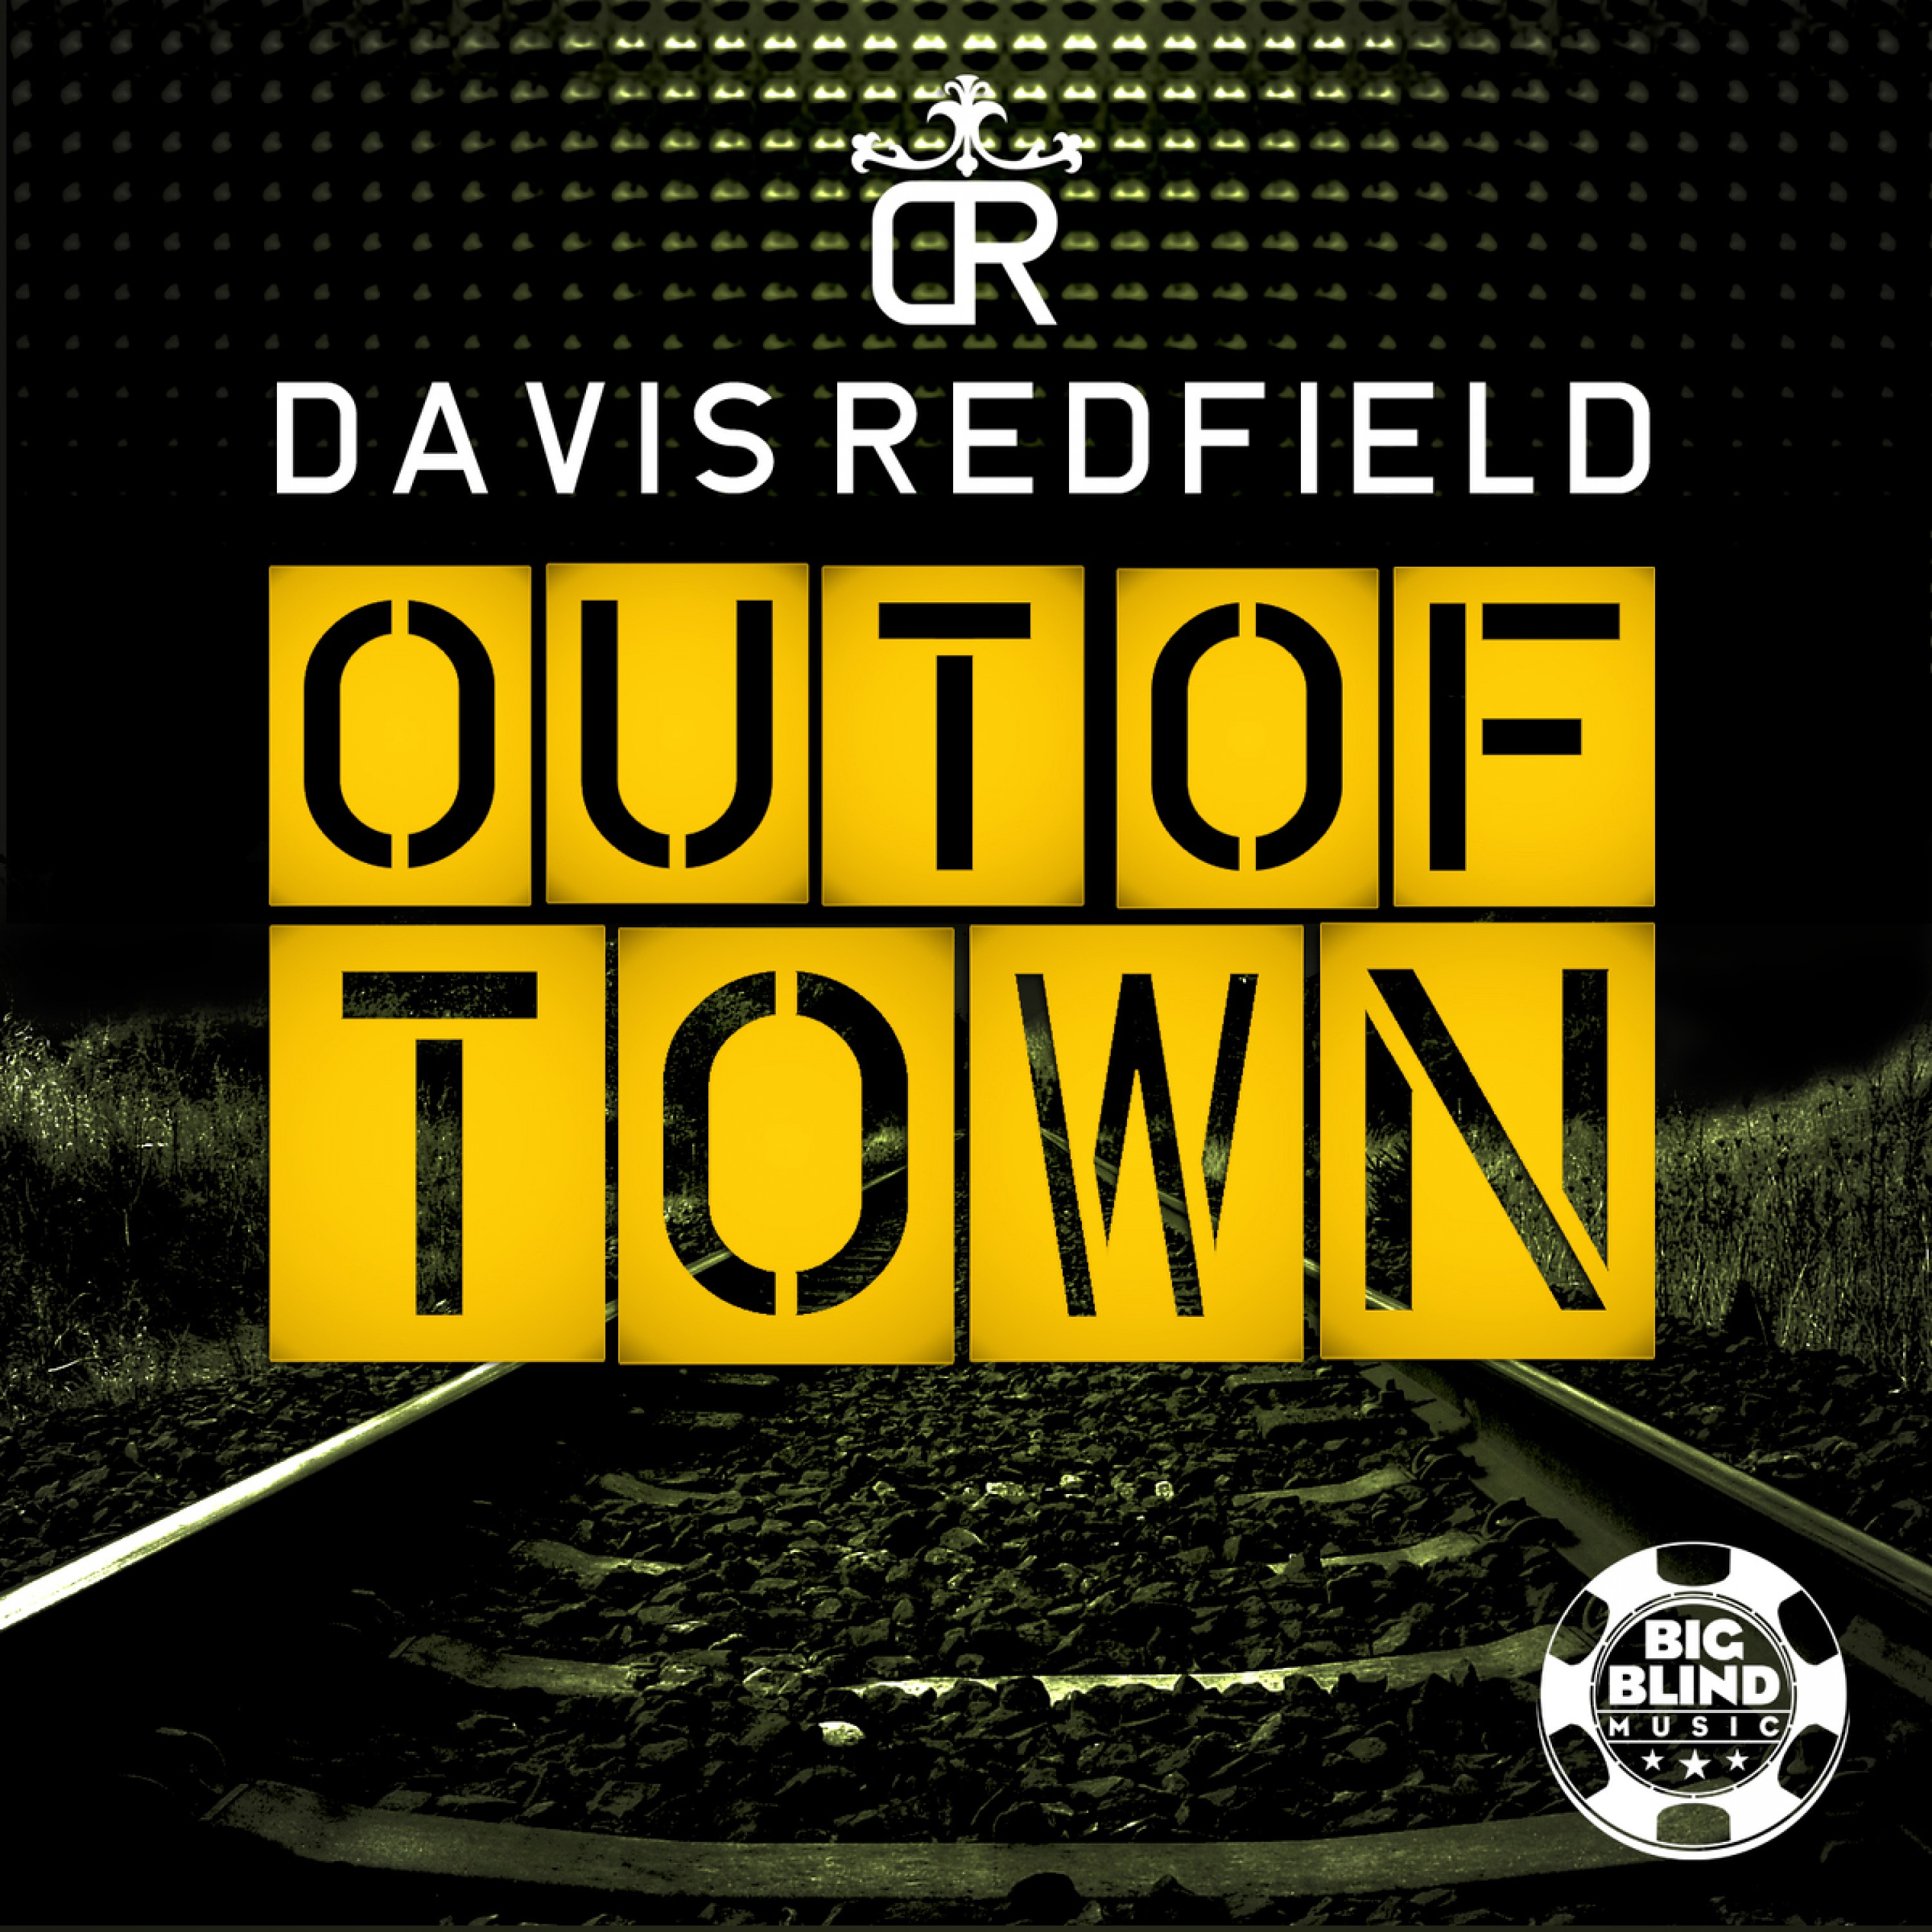 Out of Town (Club Mix Edit)